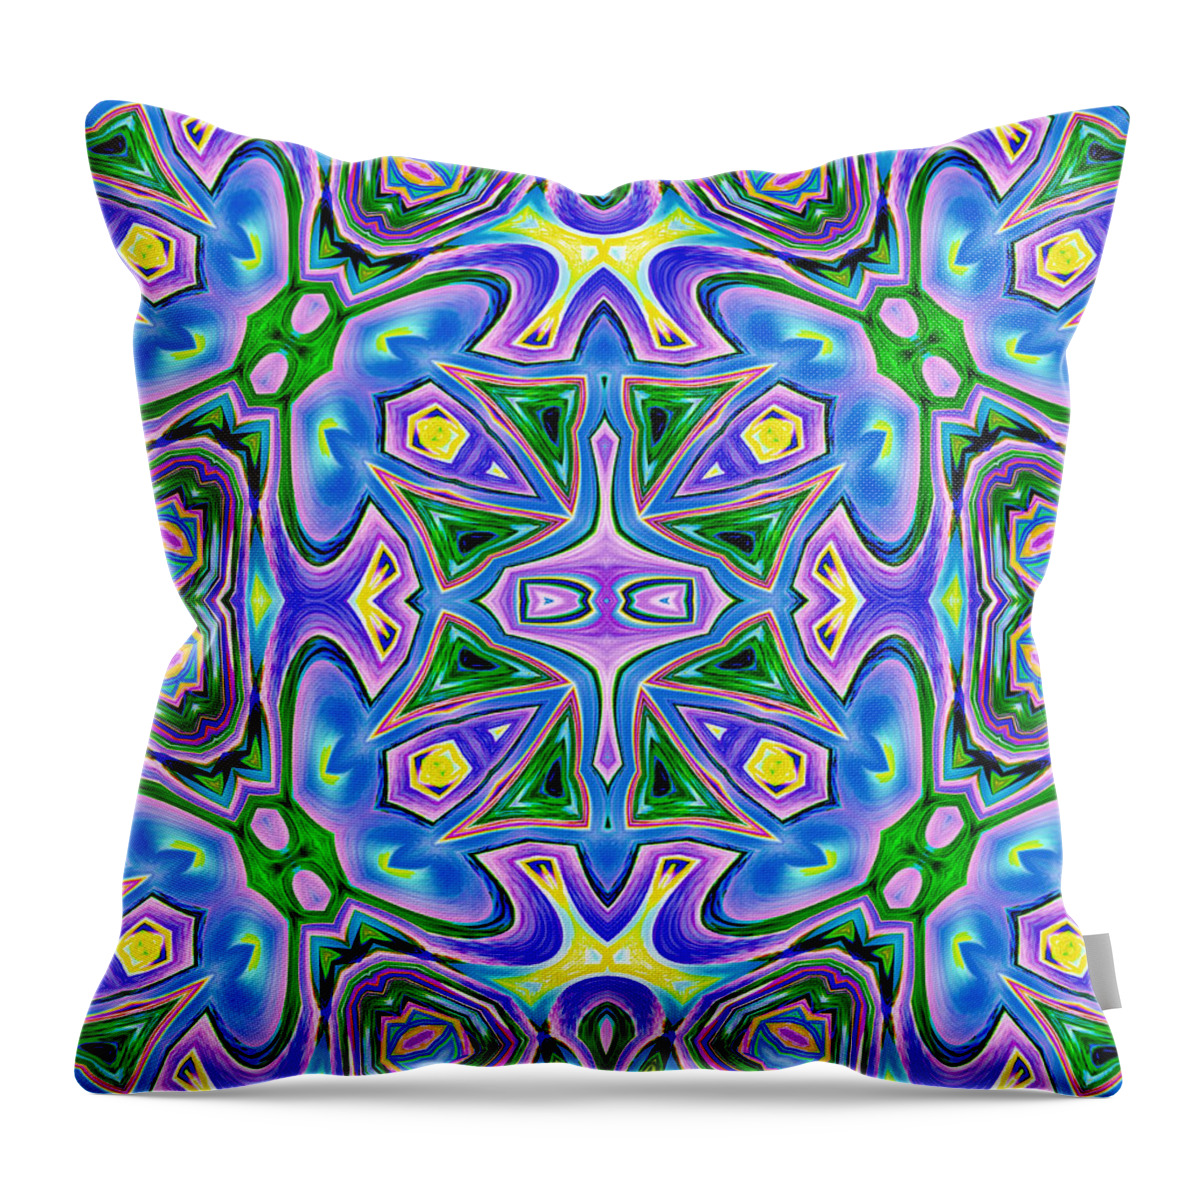 Digital Decor Throw Pillow featuring the digital art After Koolaid by Andrew Hewett